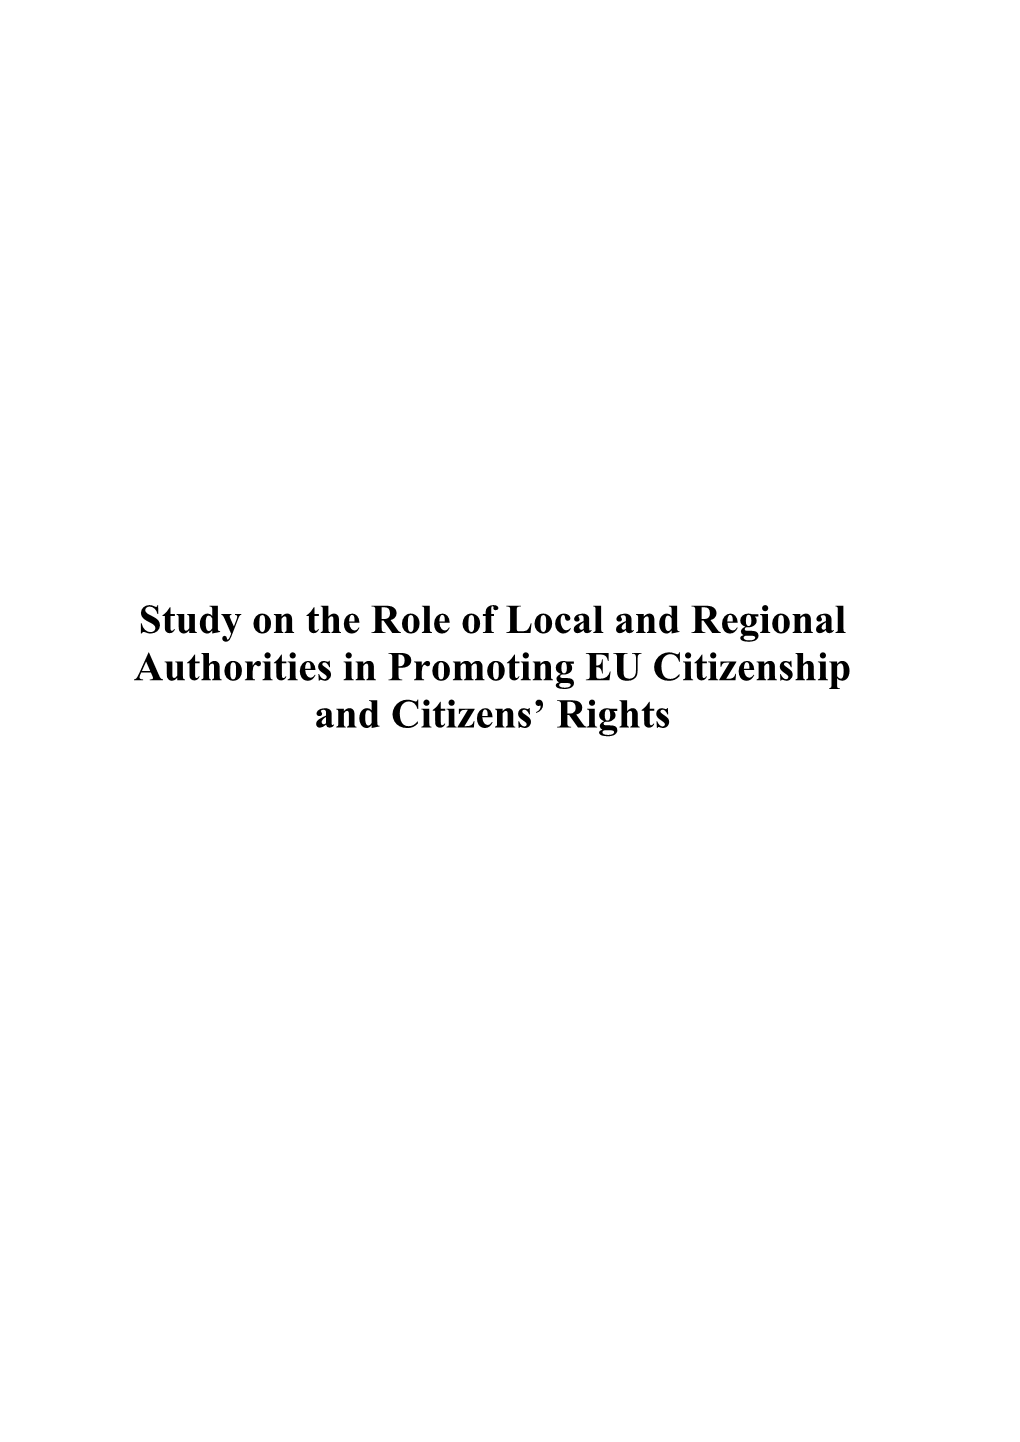 Study on the Role of Local and Regional Authorities in Promoting EU Citizenship and Citizens' Rights